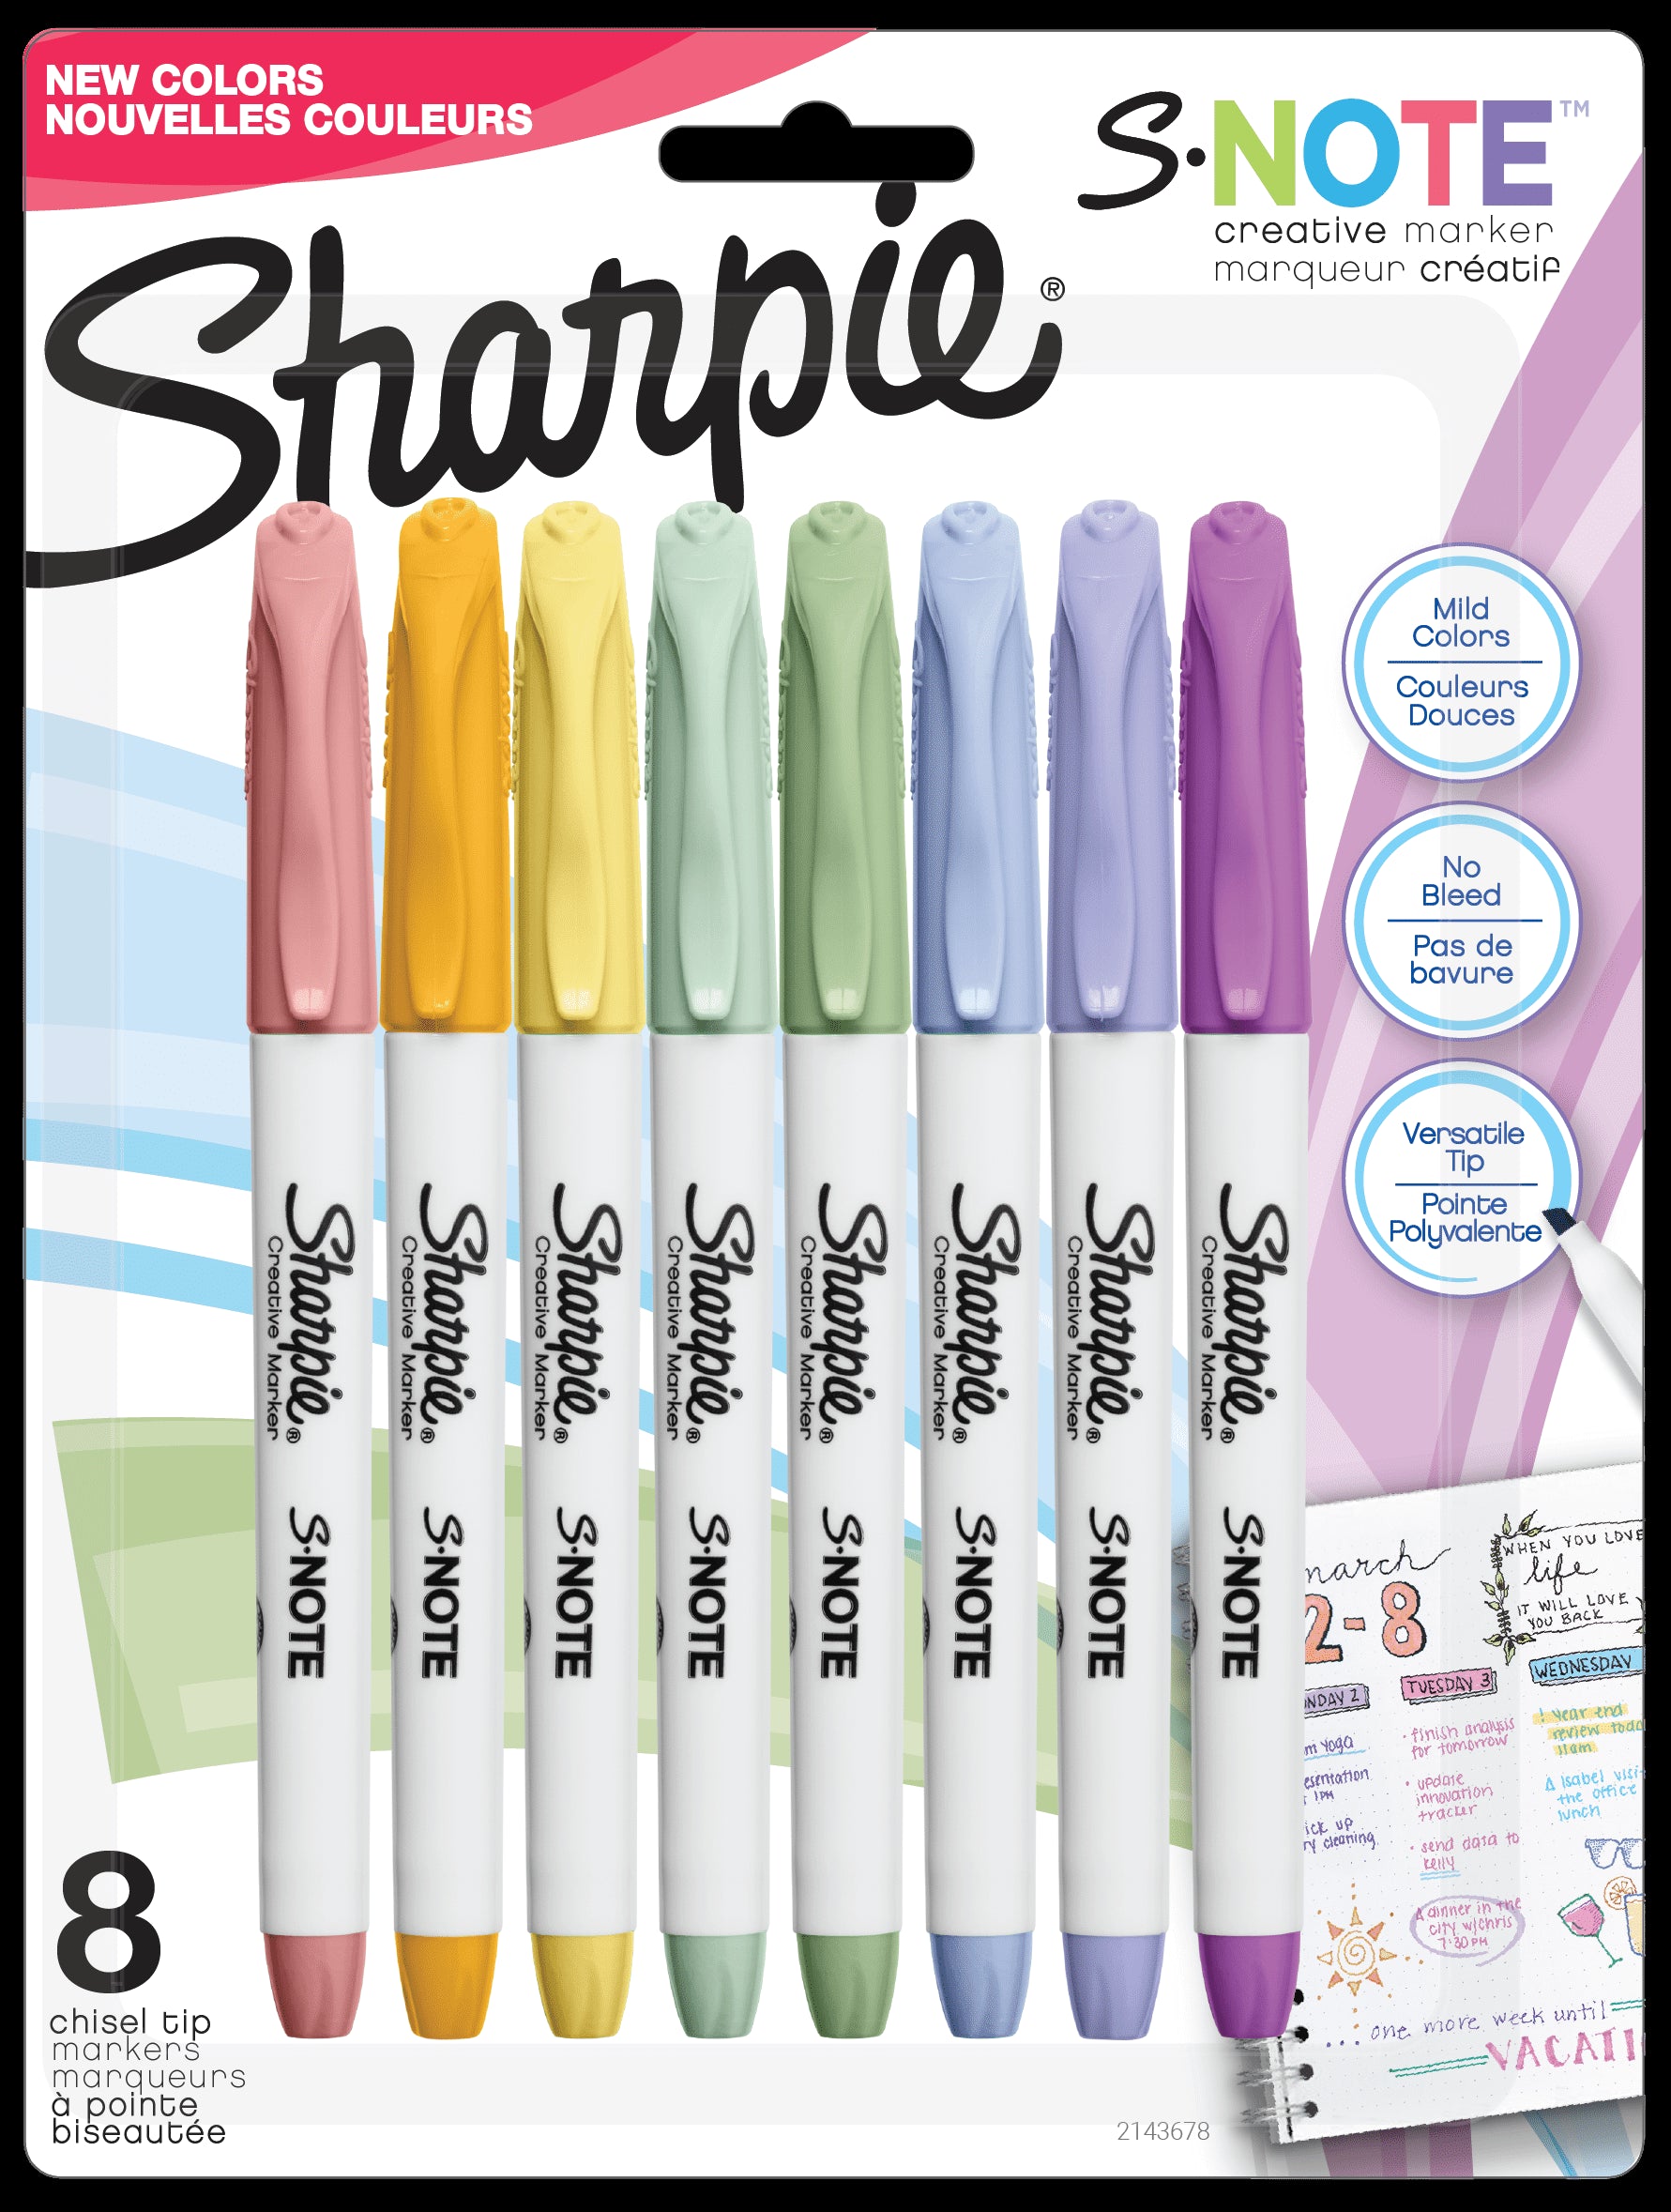 Sharpie S-Note Creative Markers with Chisel Tip, 8 Count